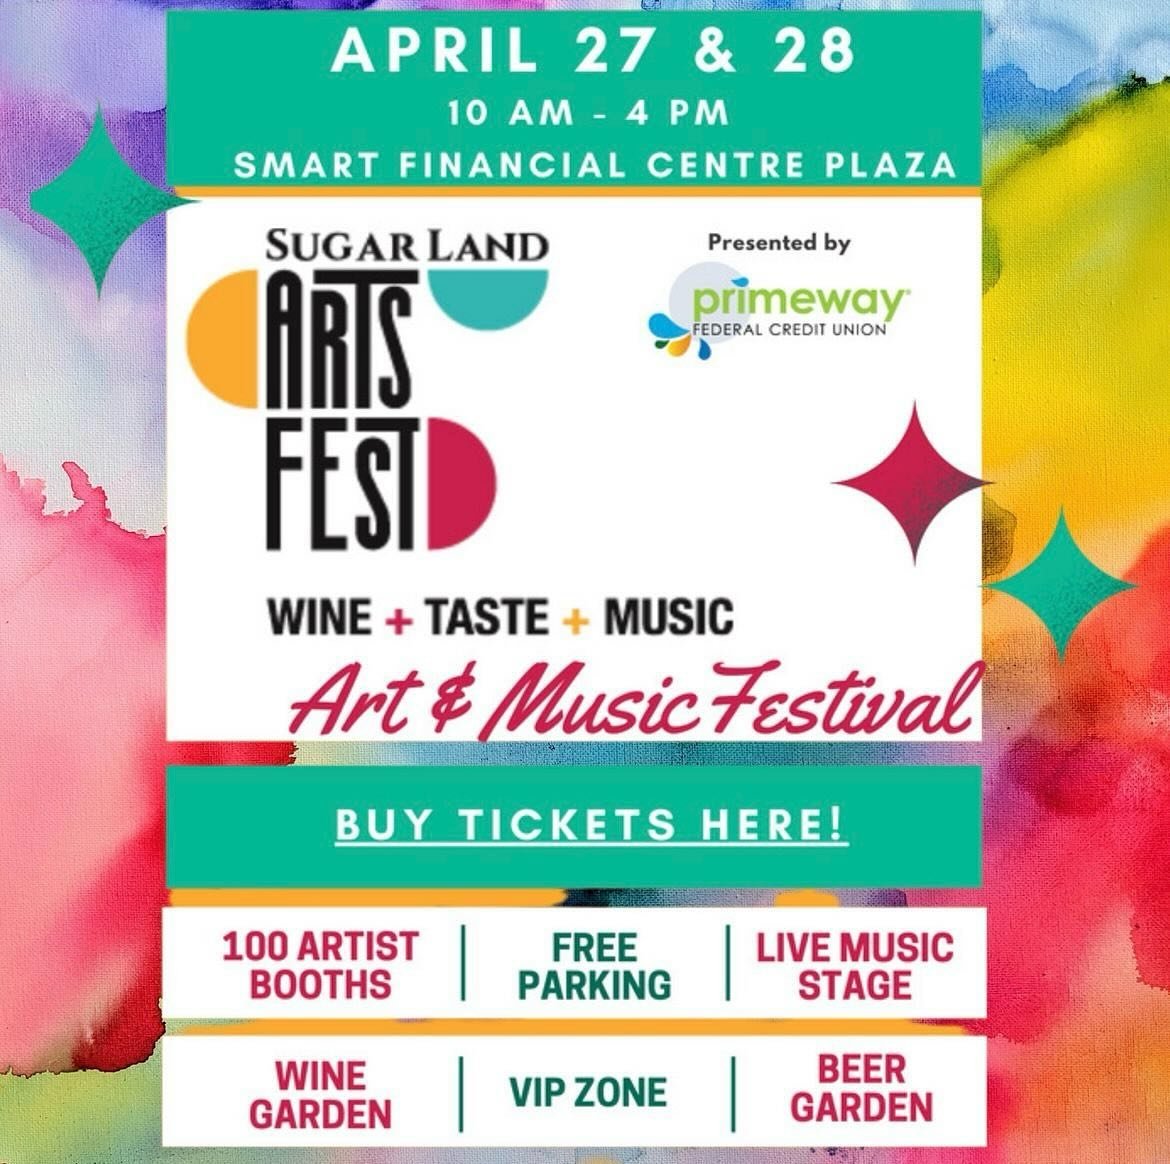 We will be at the Sugarland Arts Festival this weekend. Come see us at Booth 62!!